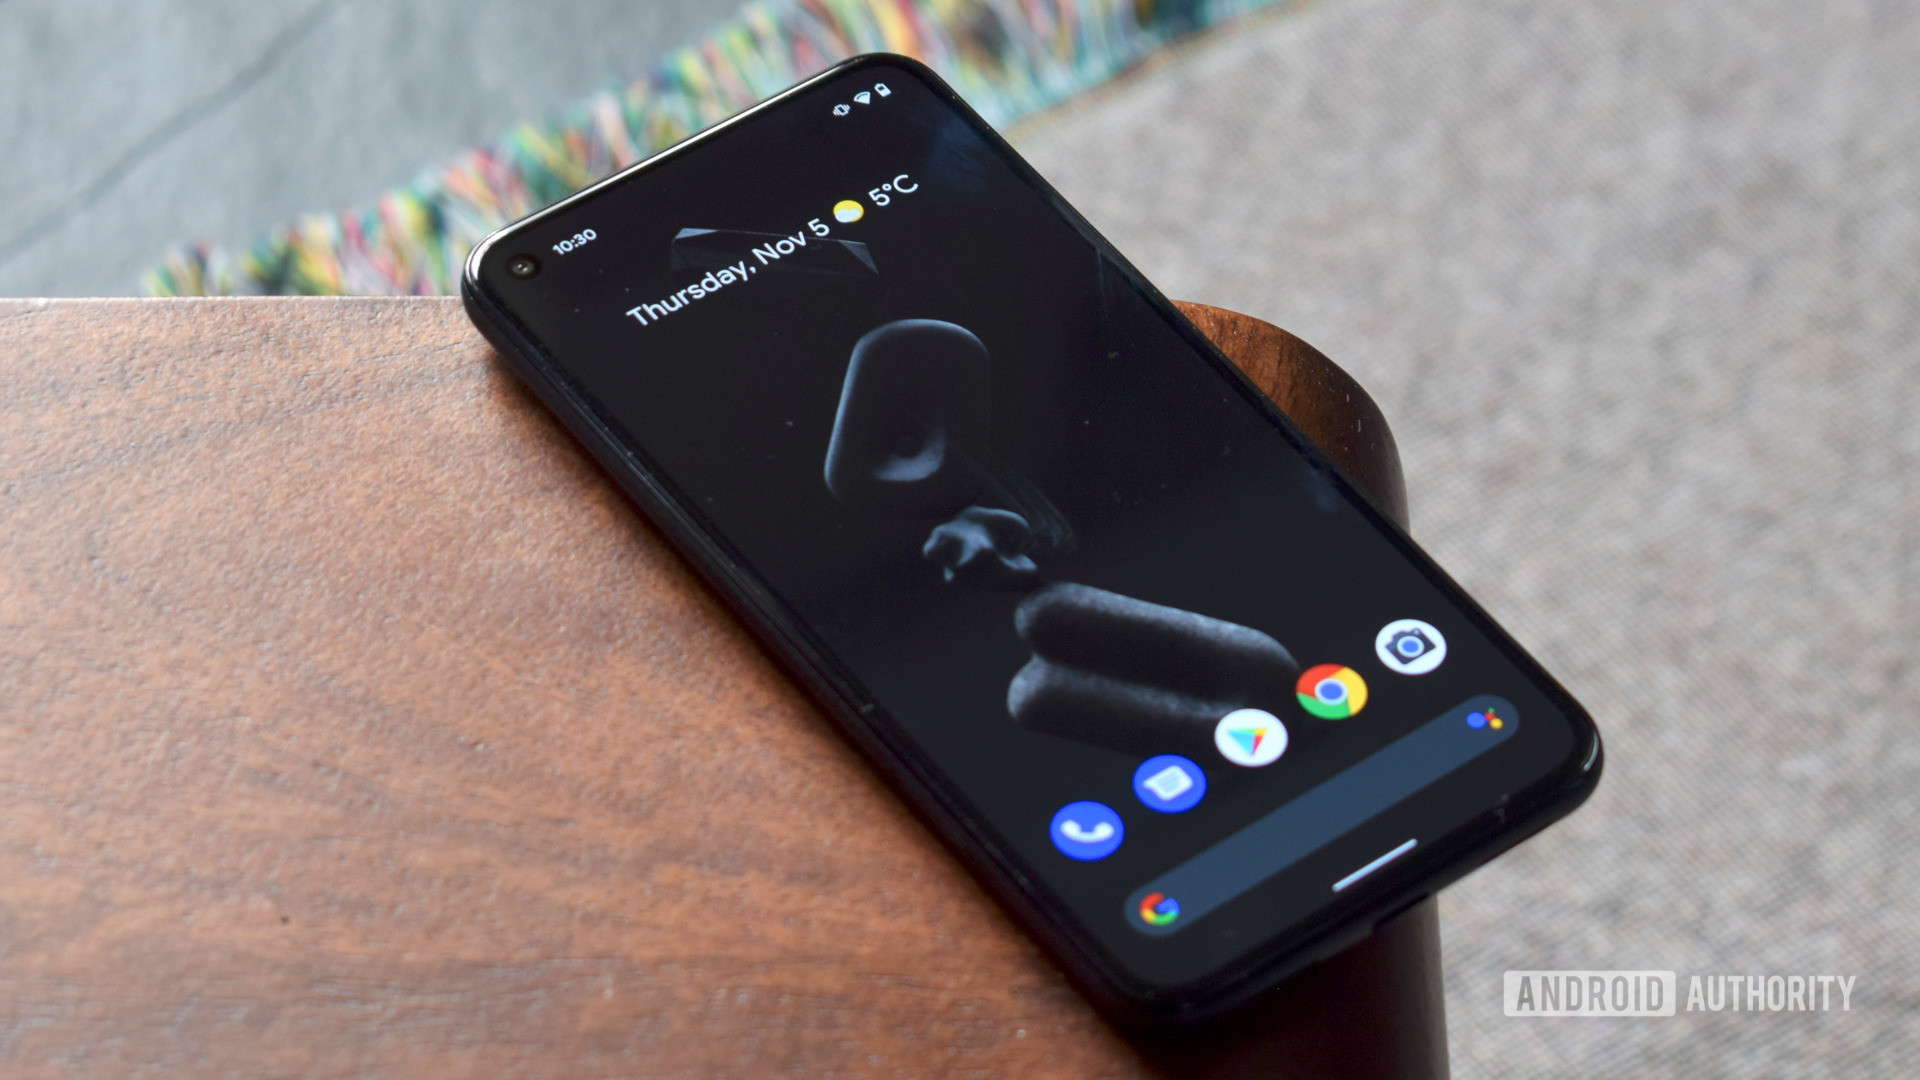 Google Pixel 5 live wallpapers: Download them and set them on any phone